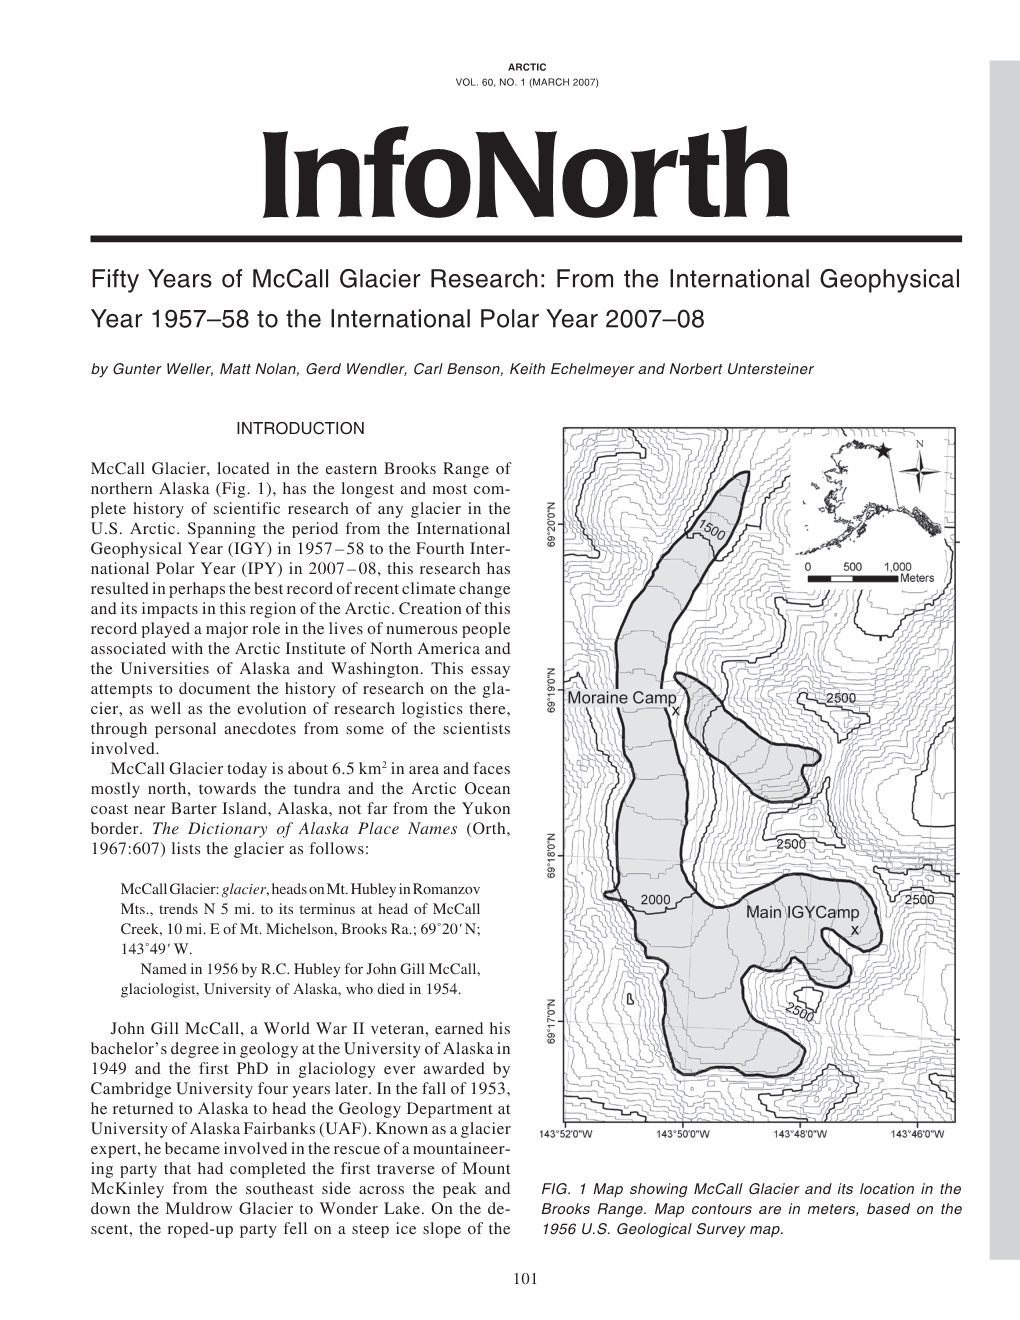 Fifty Years of Mccall Glacier Research: from the International Geophysical Year 1957–58 to the International Polar Year 2007–08